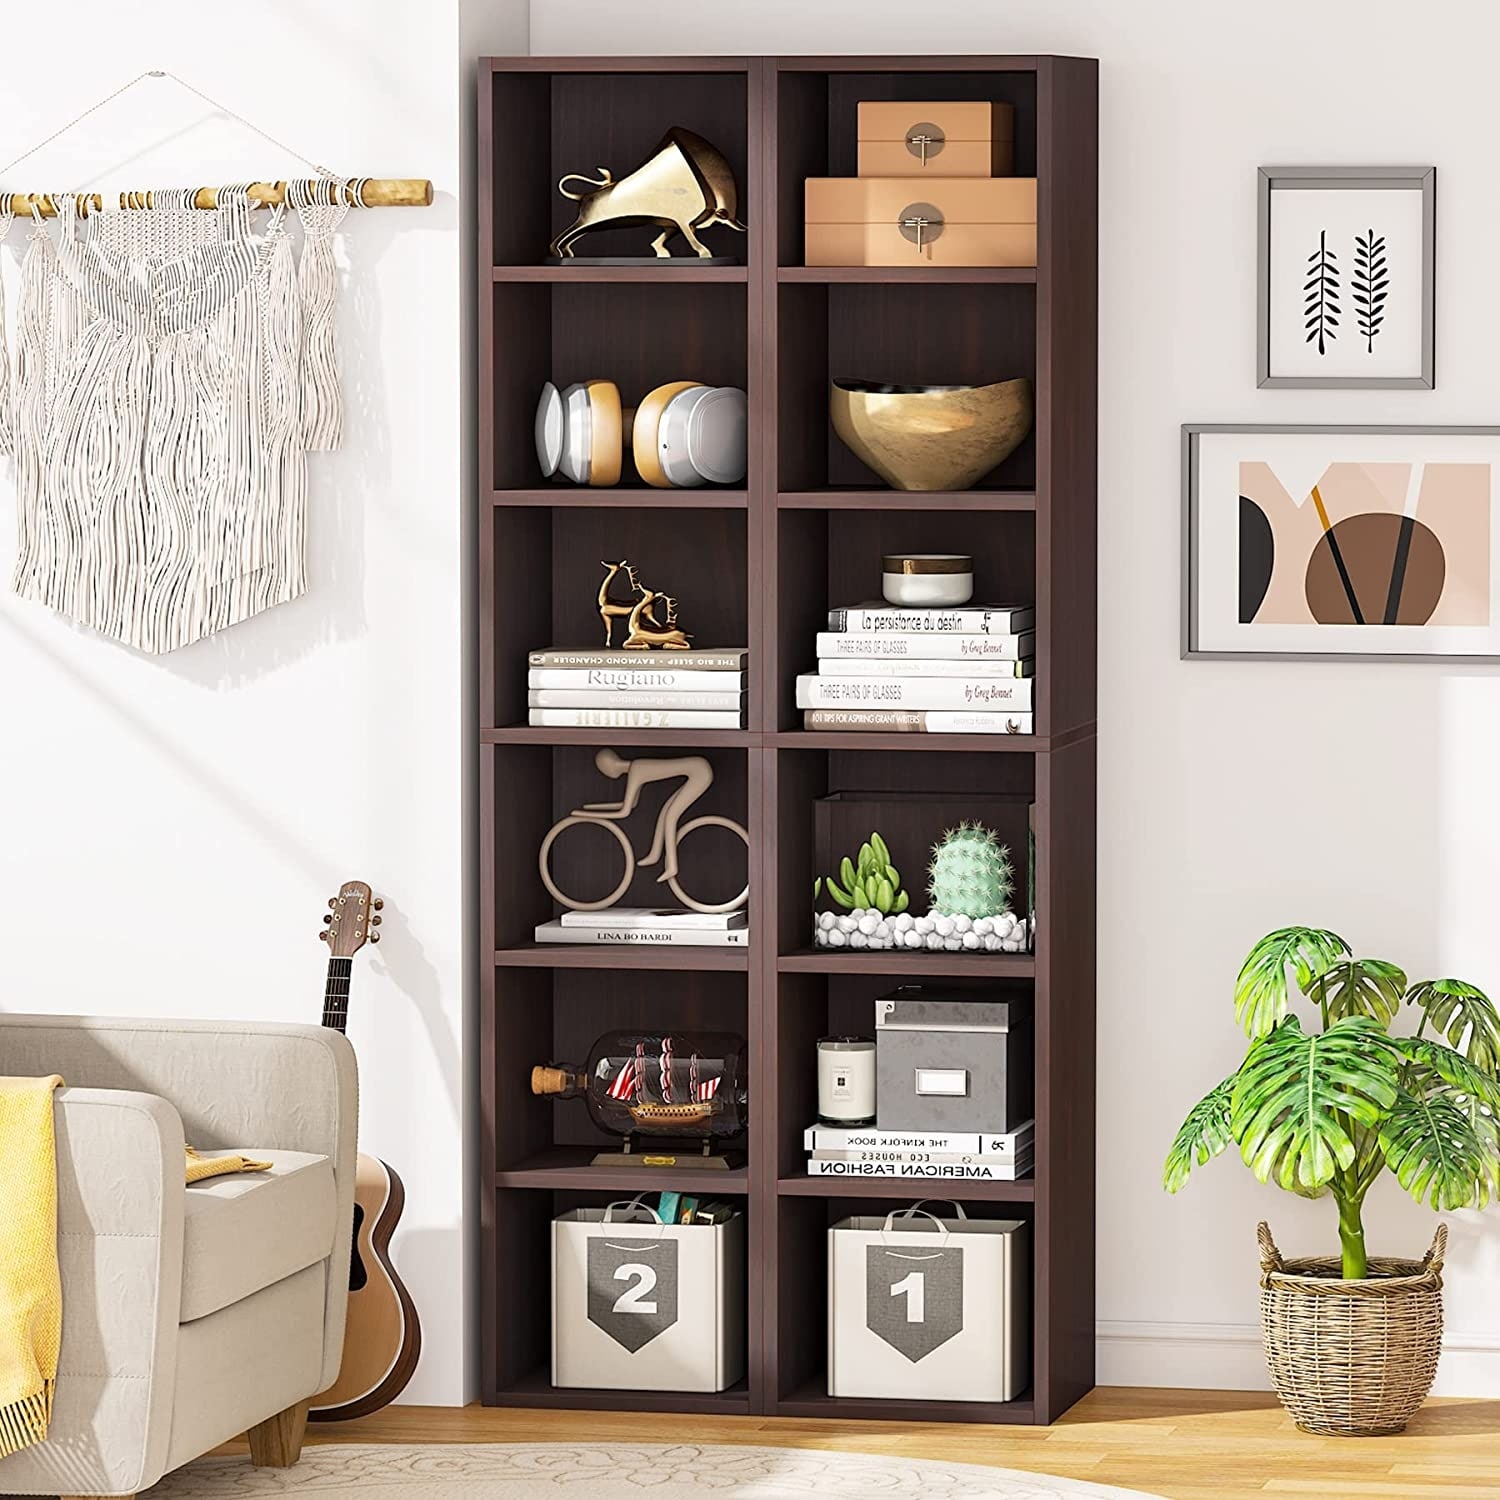 https://ak1.ostkcdn.com/images/products/is/images/direct/58a0aff06bfebae08f949bf63d5575ca7a388d2d/6-Tier-Tall-Narrow-Bookshelf%2C-Whit-Bookcase-Cube-Storage-Organizer-for-Home-Office.jpg